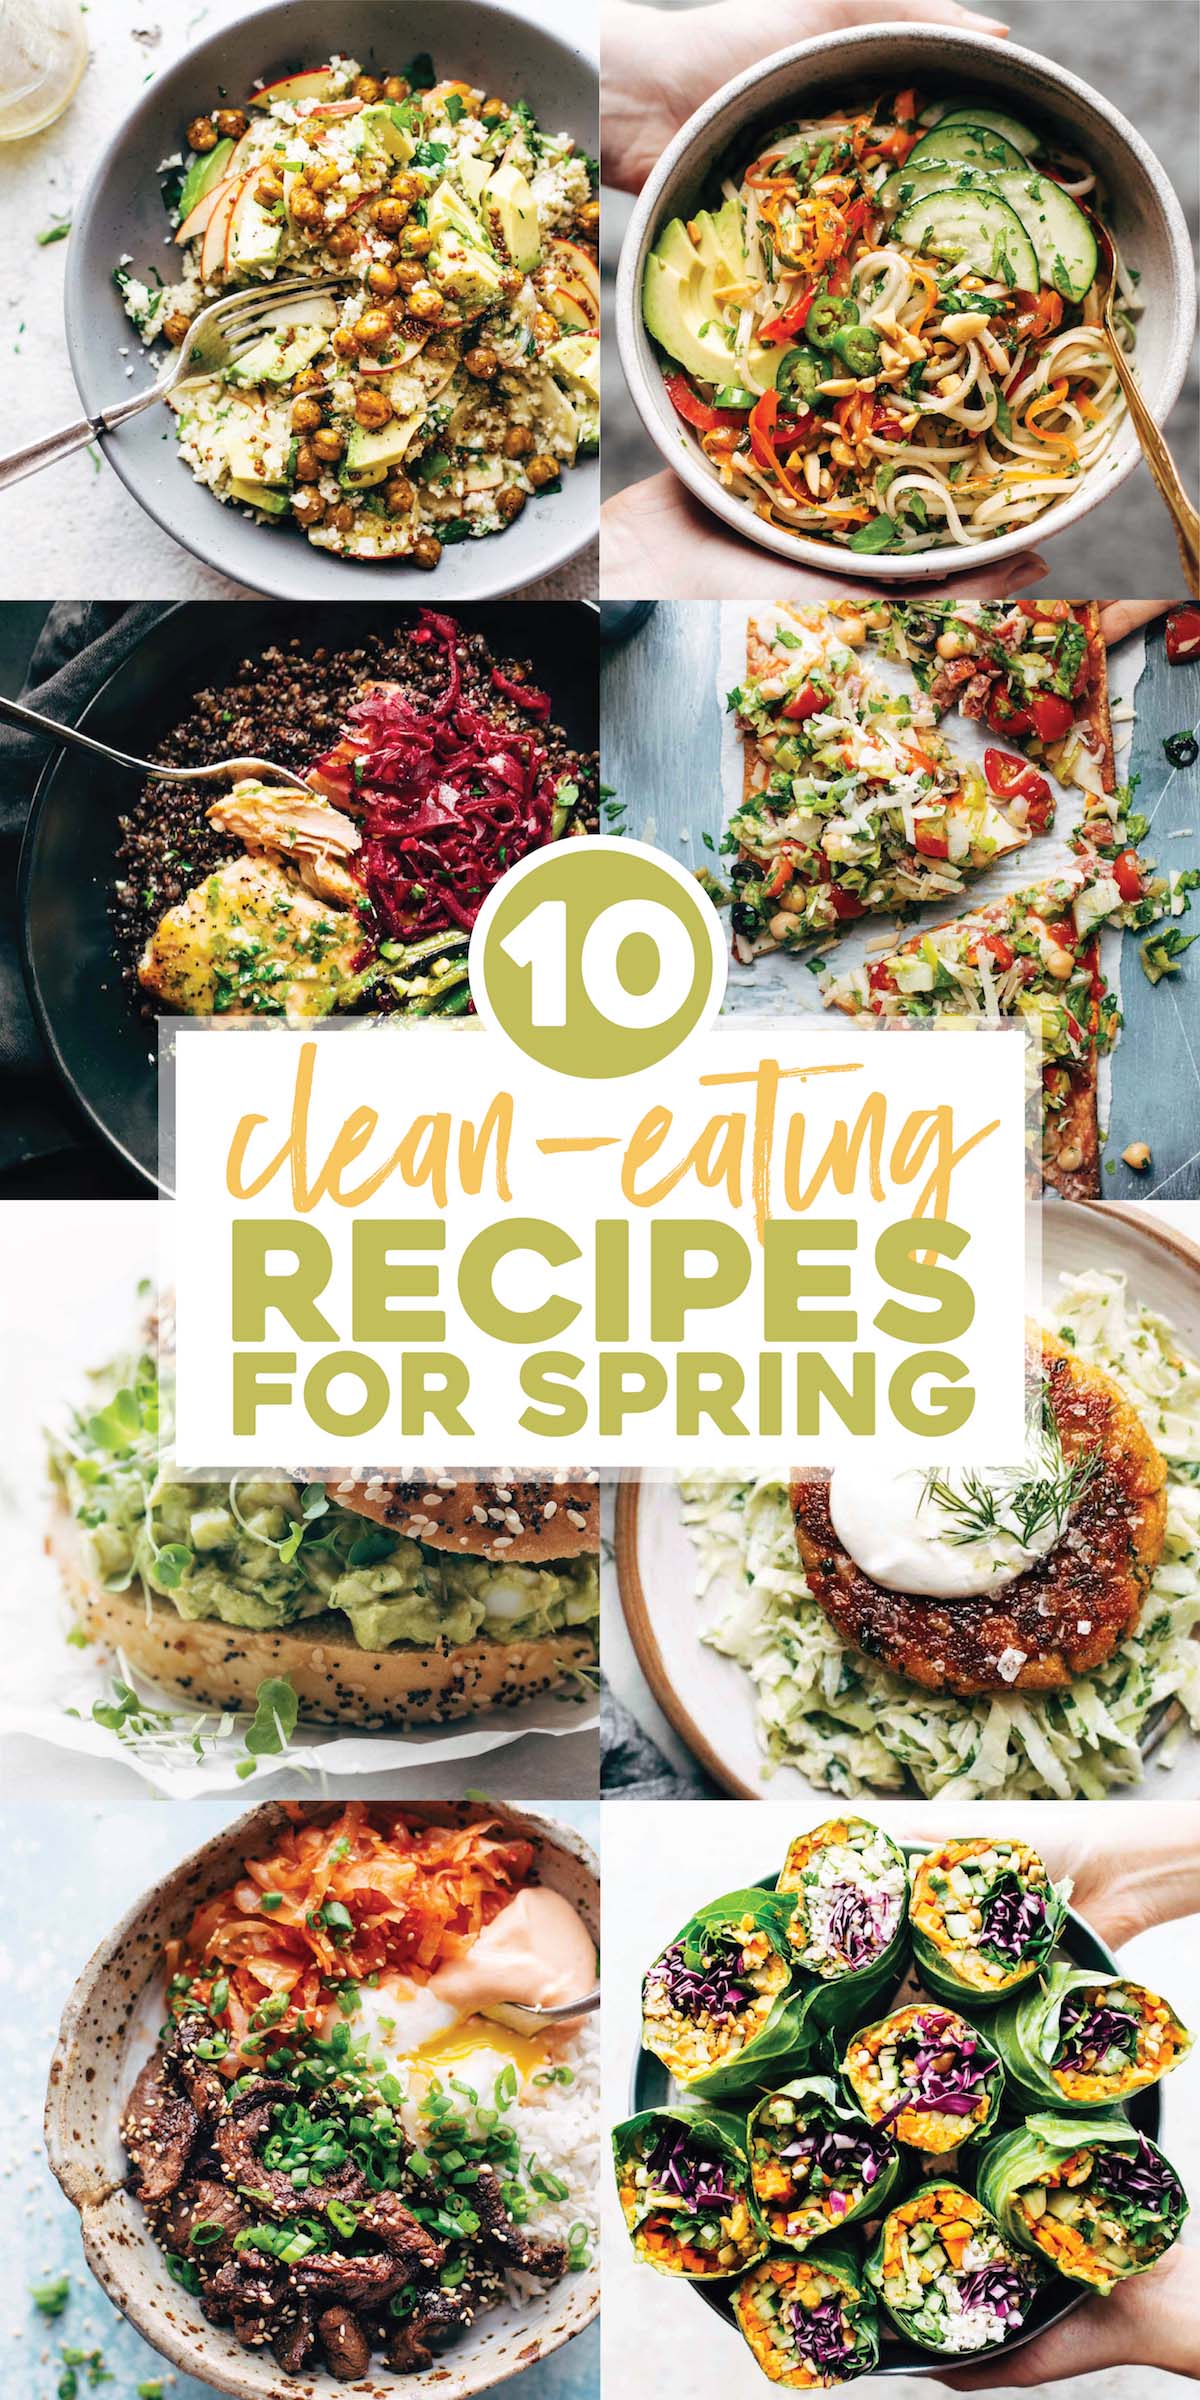 10 Clean Eating Recipes For a Happy Spring